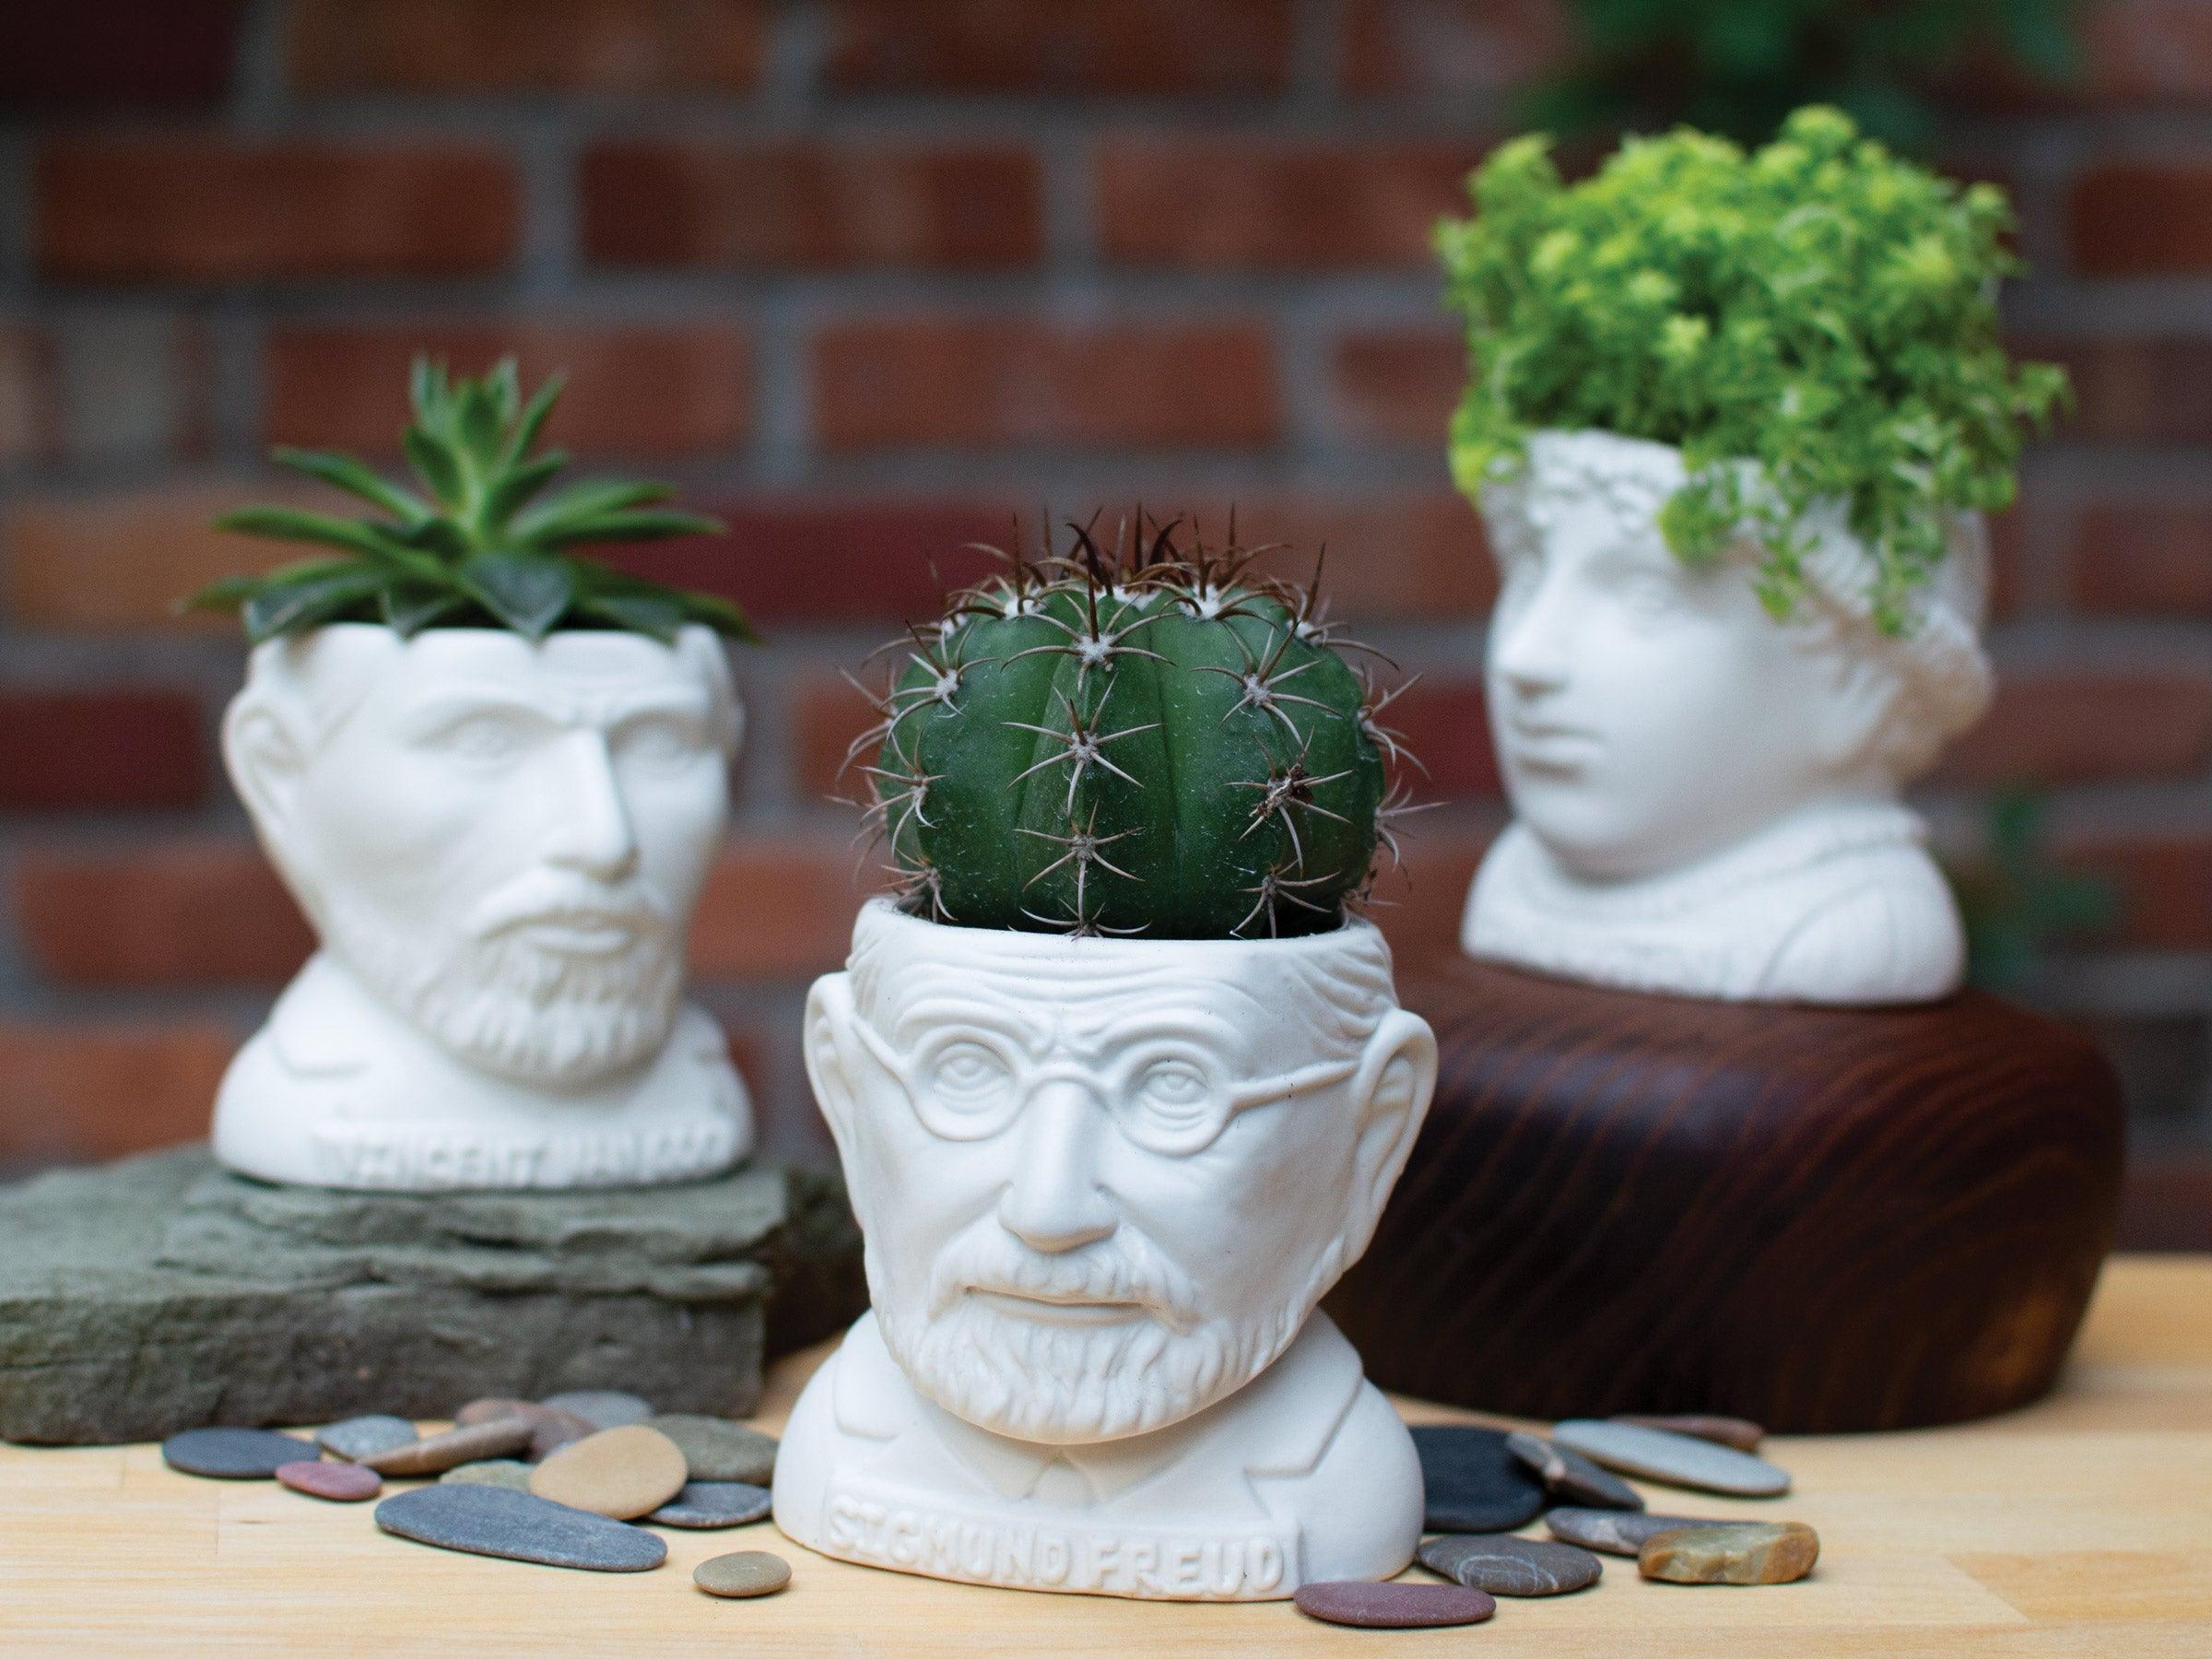 Product photo of Sigmund Freud Bust Planter, a novelty gift manufactured by The Unemployed Philosophers Guild.